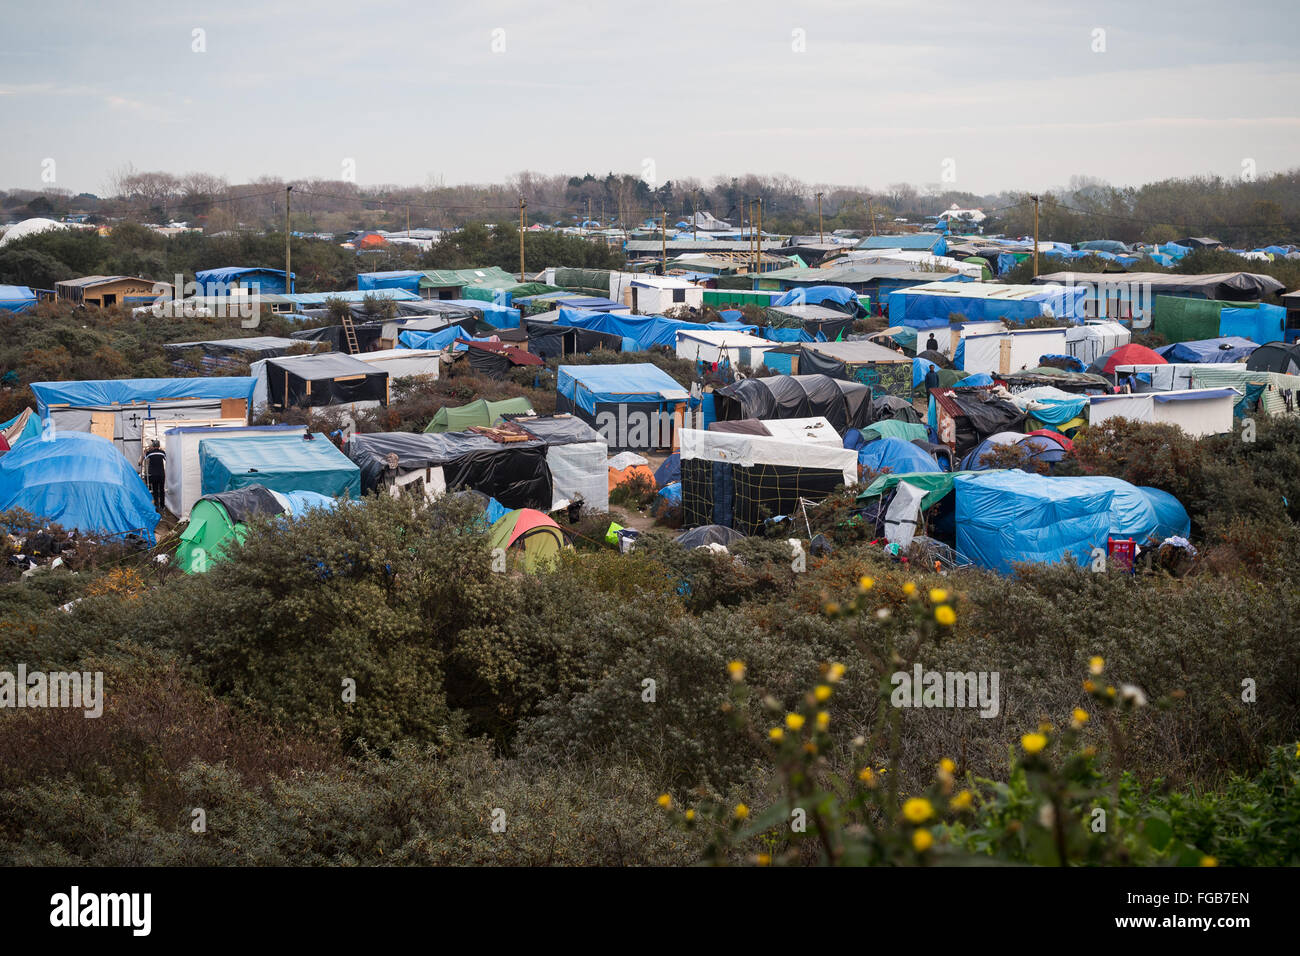 Overlooking the multitude of makeshift shelters in the Calais Refugee Camp, the Jungle, Calais, France Stock Photo